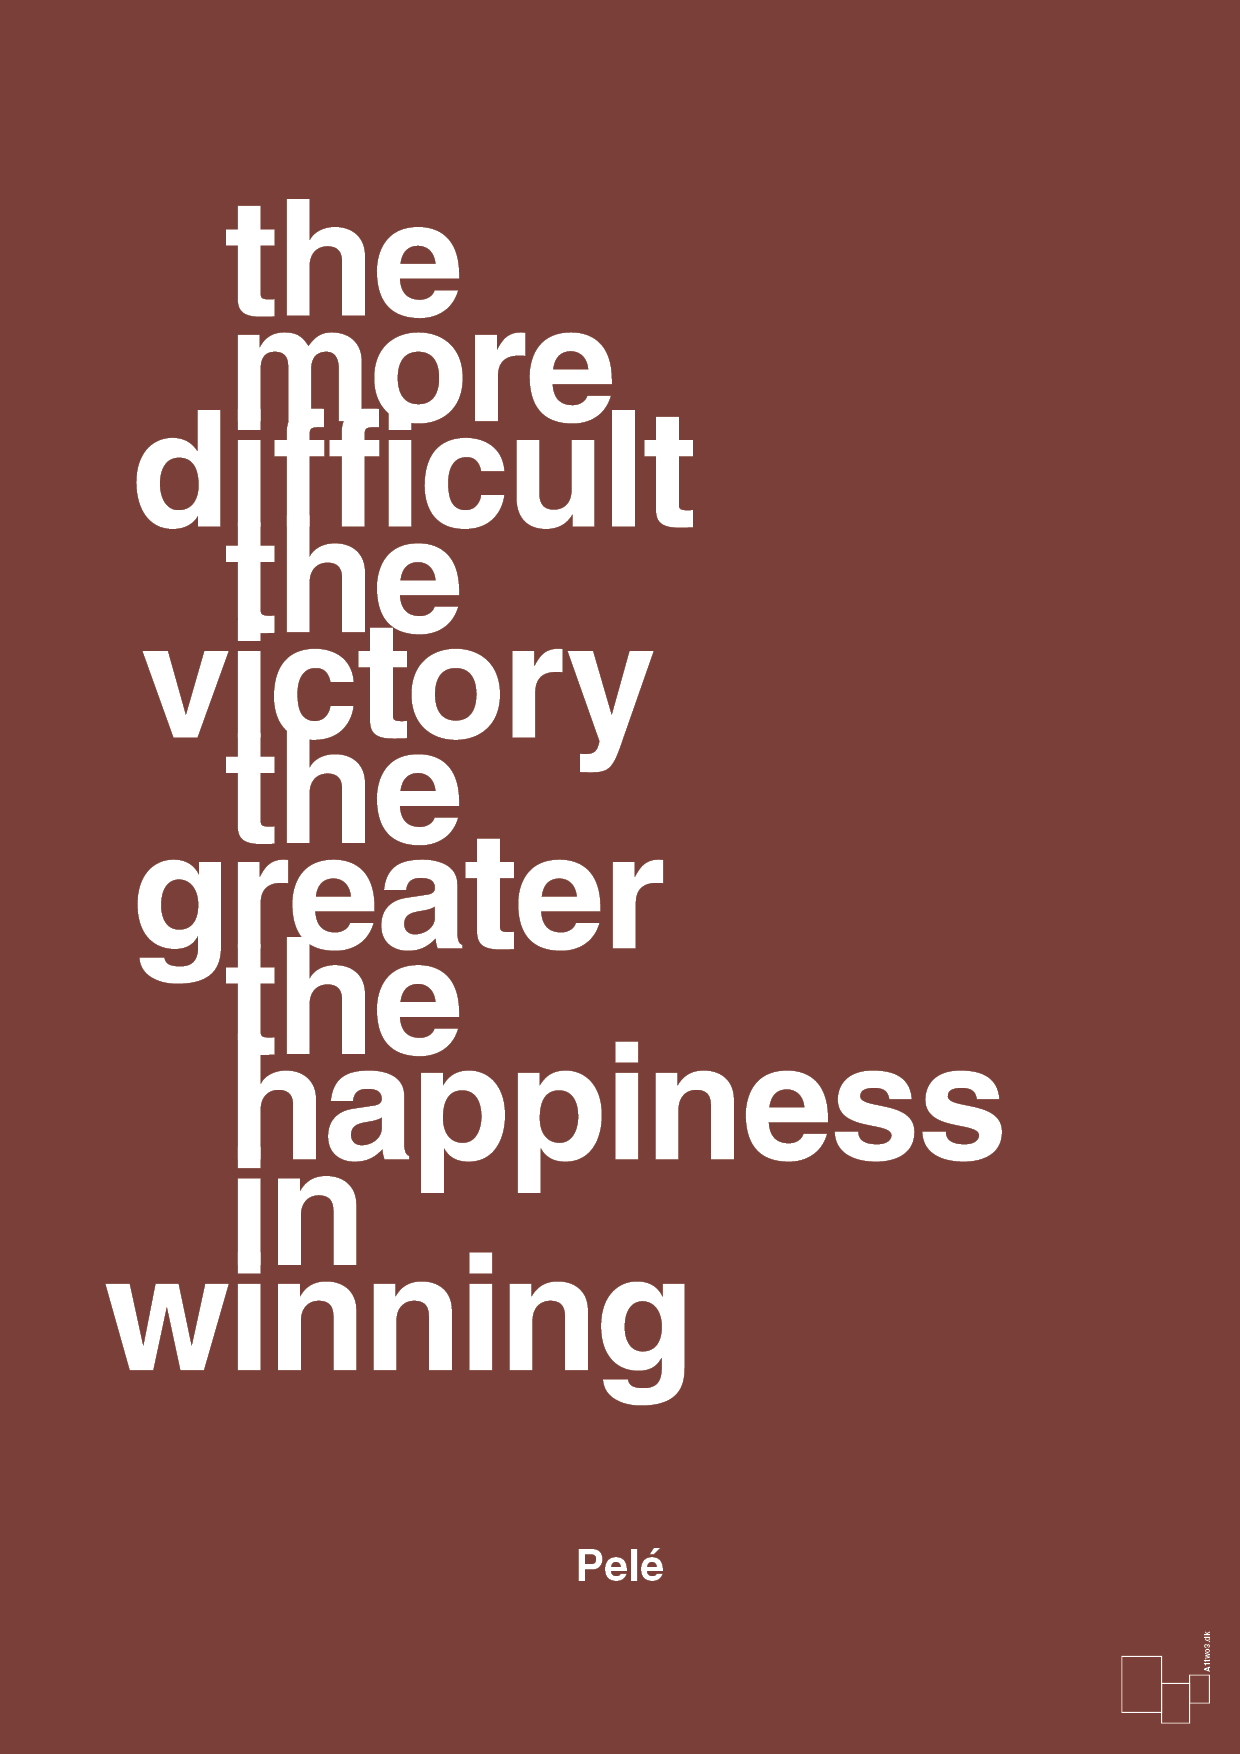 the more difficult the victory the greater the happiness in winning - Plakat med Citater i Red Pepper